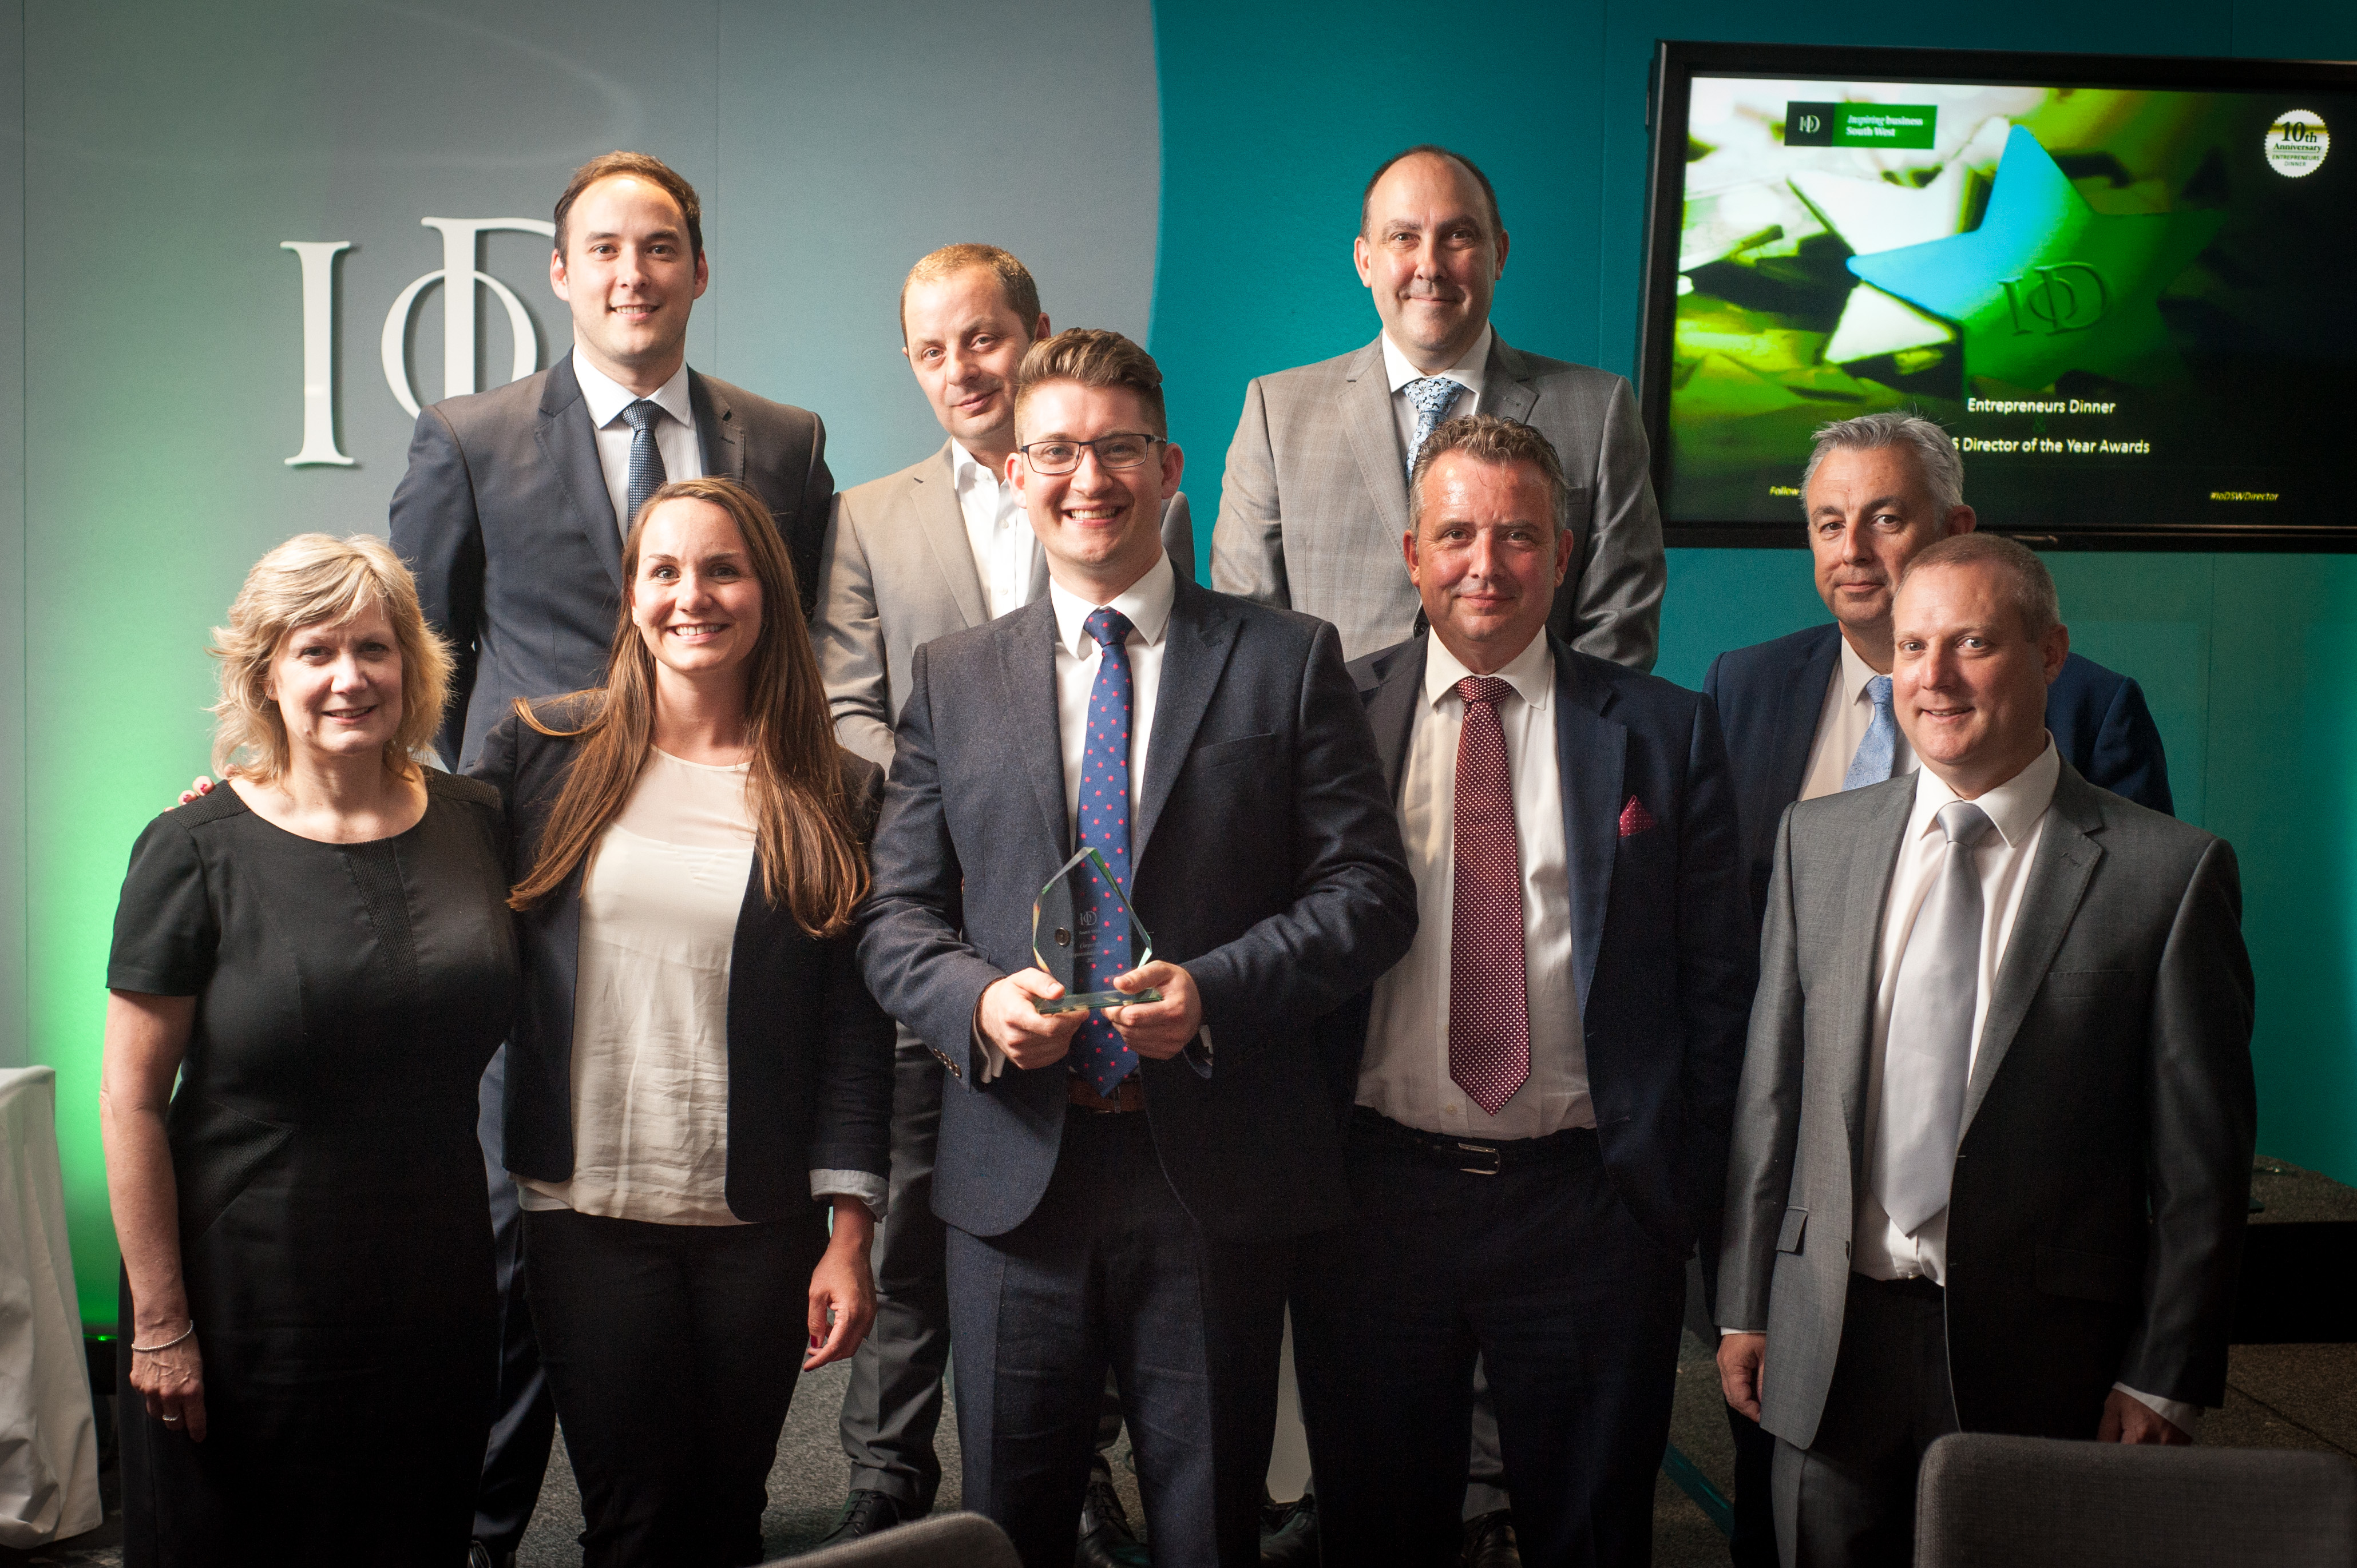 Bath Business News Photo Gallery: IoD South West Director of the Year Awards